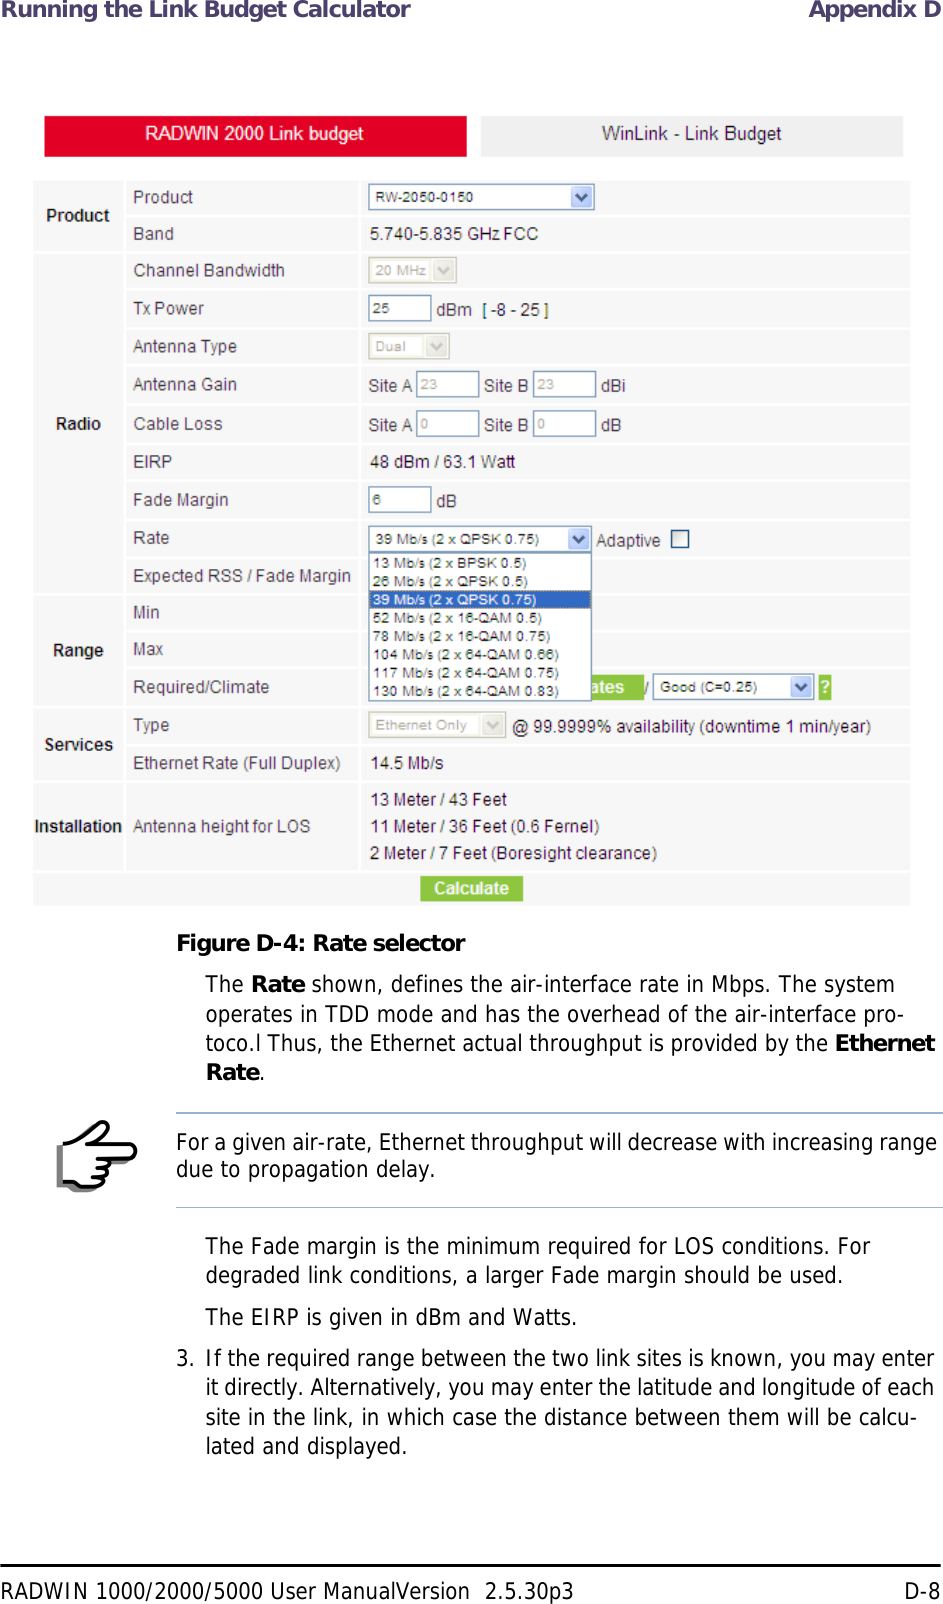 Running the Link Budget Calculator Appendix DRADWIN 1000/2000/5000 User ManualVersion  2.5.30p3 D-8Figure D-4: Rate selectorThe Rate shown, defines the air-interface rate in Mbps. The system operates in TDD mode and has the overhead of the air-interface pro-toco.l Thus, the Ethernet actual throughput is provided by the Ethernet Rate.The Fade margin is the minimum required for LOS conditions. For degraded link conditions, a larger Fade margin should be used.The EIRP is given in dBm and Watts.3. If the required range between the two link sites is known, you may enter it directly. Alternatively, you may enter the latitude and longitude of each site in the link, in which case the distance between them will be calcu-lated and displayed.NoteFor a given air-rate, Ethernet throughput will decrease with increasing range due to propagation delay.